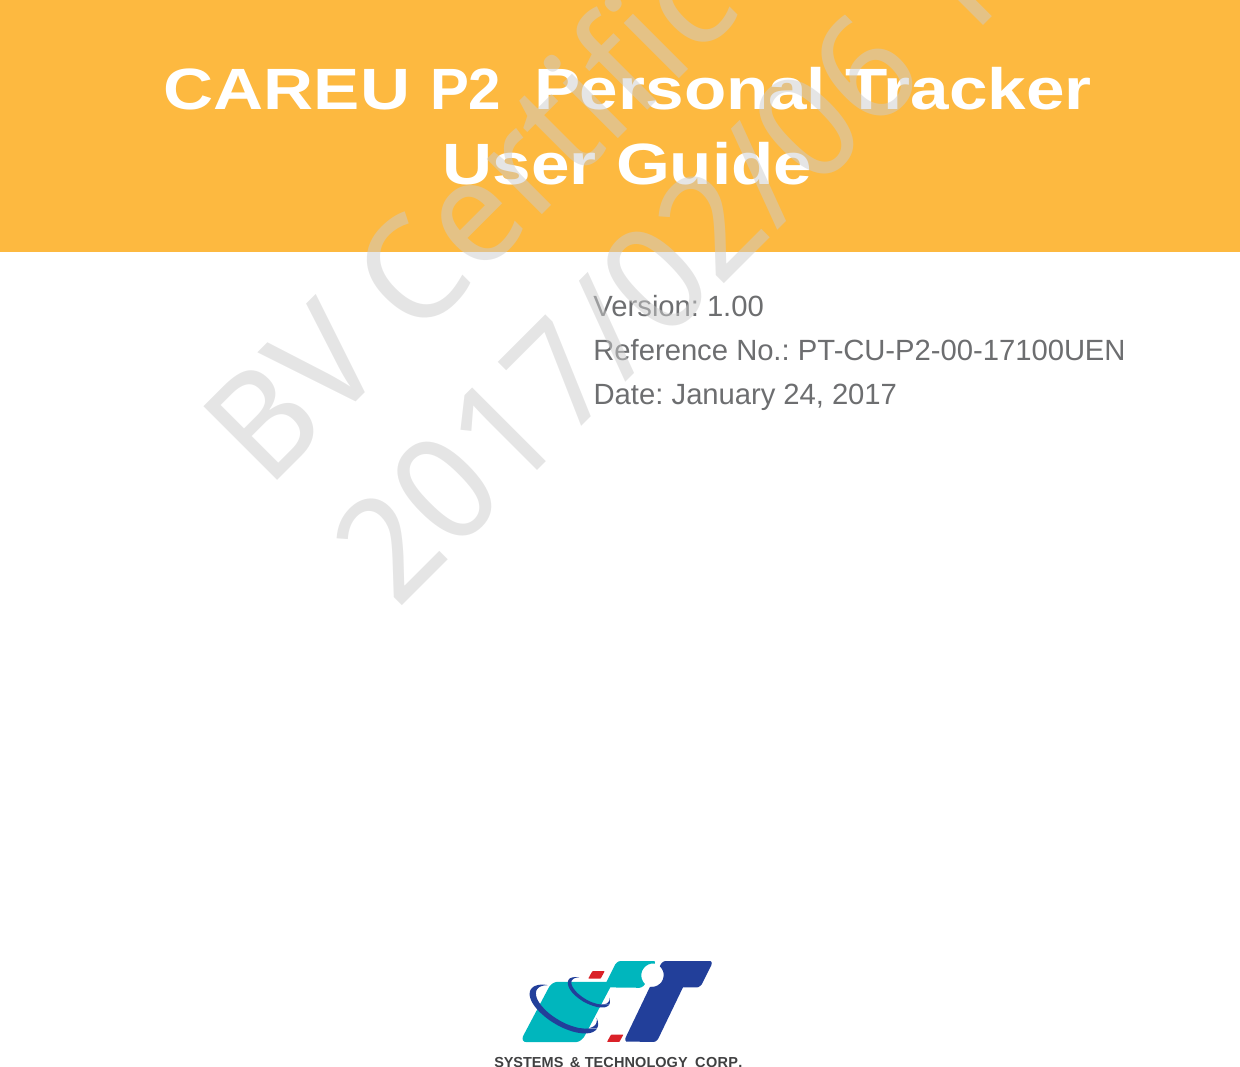                       CAREU P2  Personal Tracker User Guide     Version: 1.00 Reference No.: PT-CU-P2-00-17100UEN Date: January 24, 2017                                SYSTEMS &amp; TECHNOLOGY CORP. BV Certificate Use2017/02/06 17:09